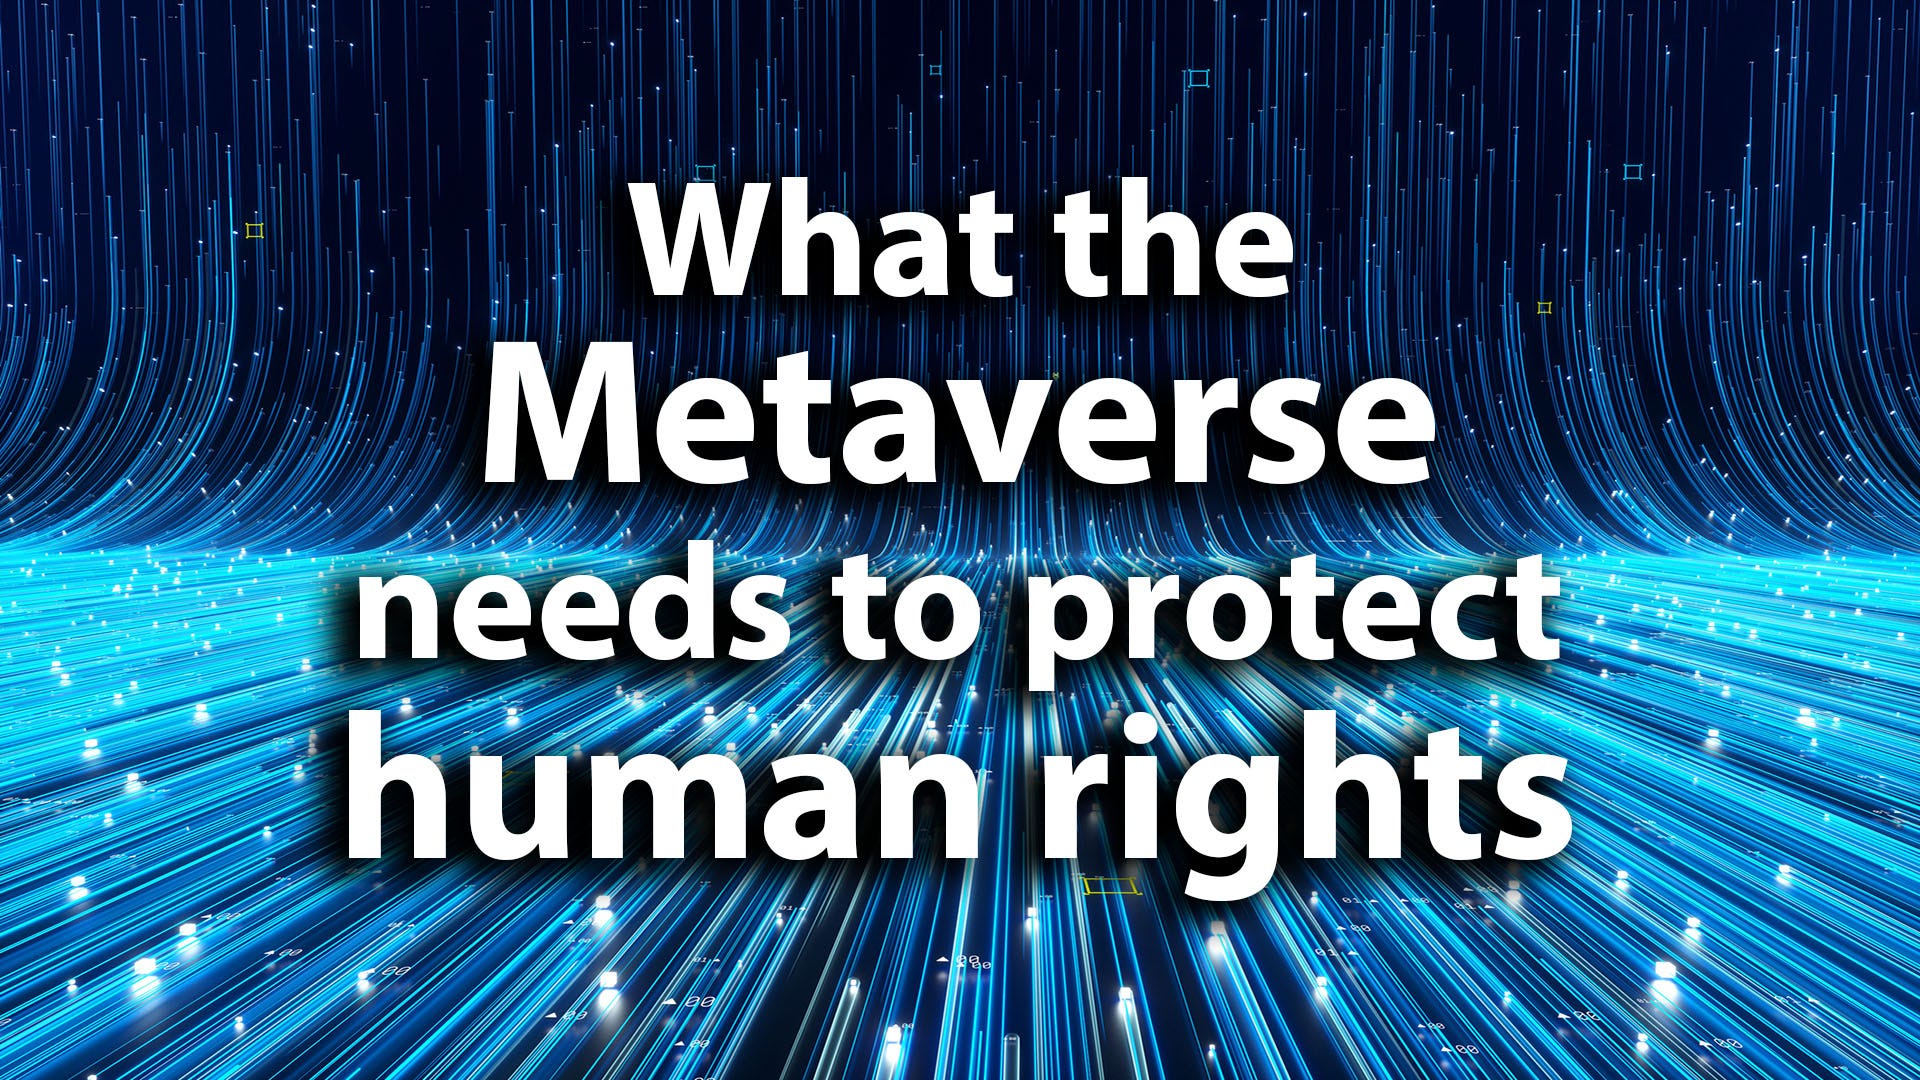 What the Metaverse needs to protect human rights